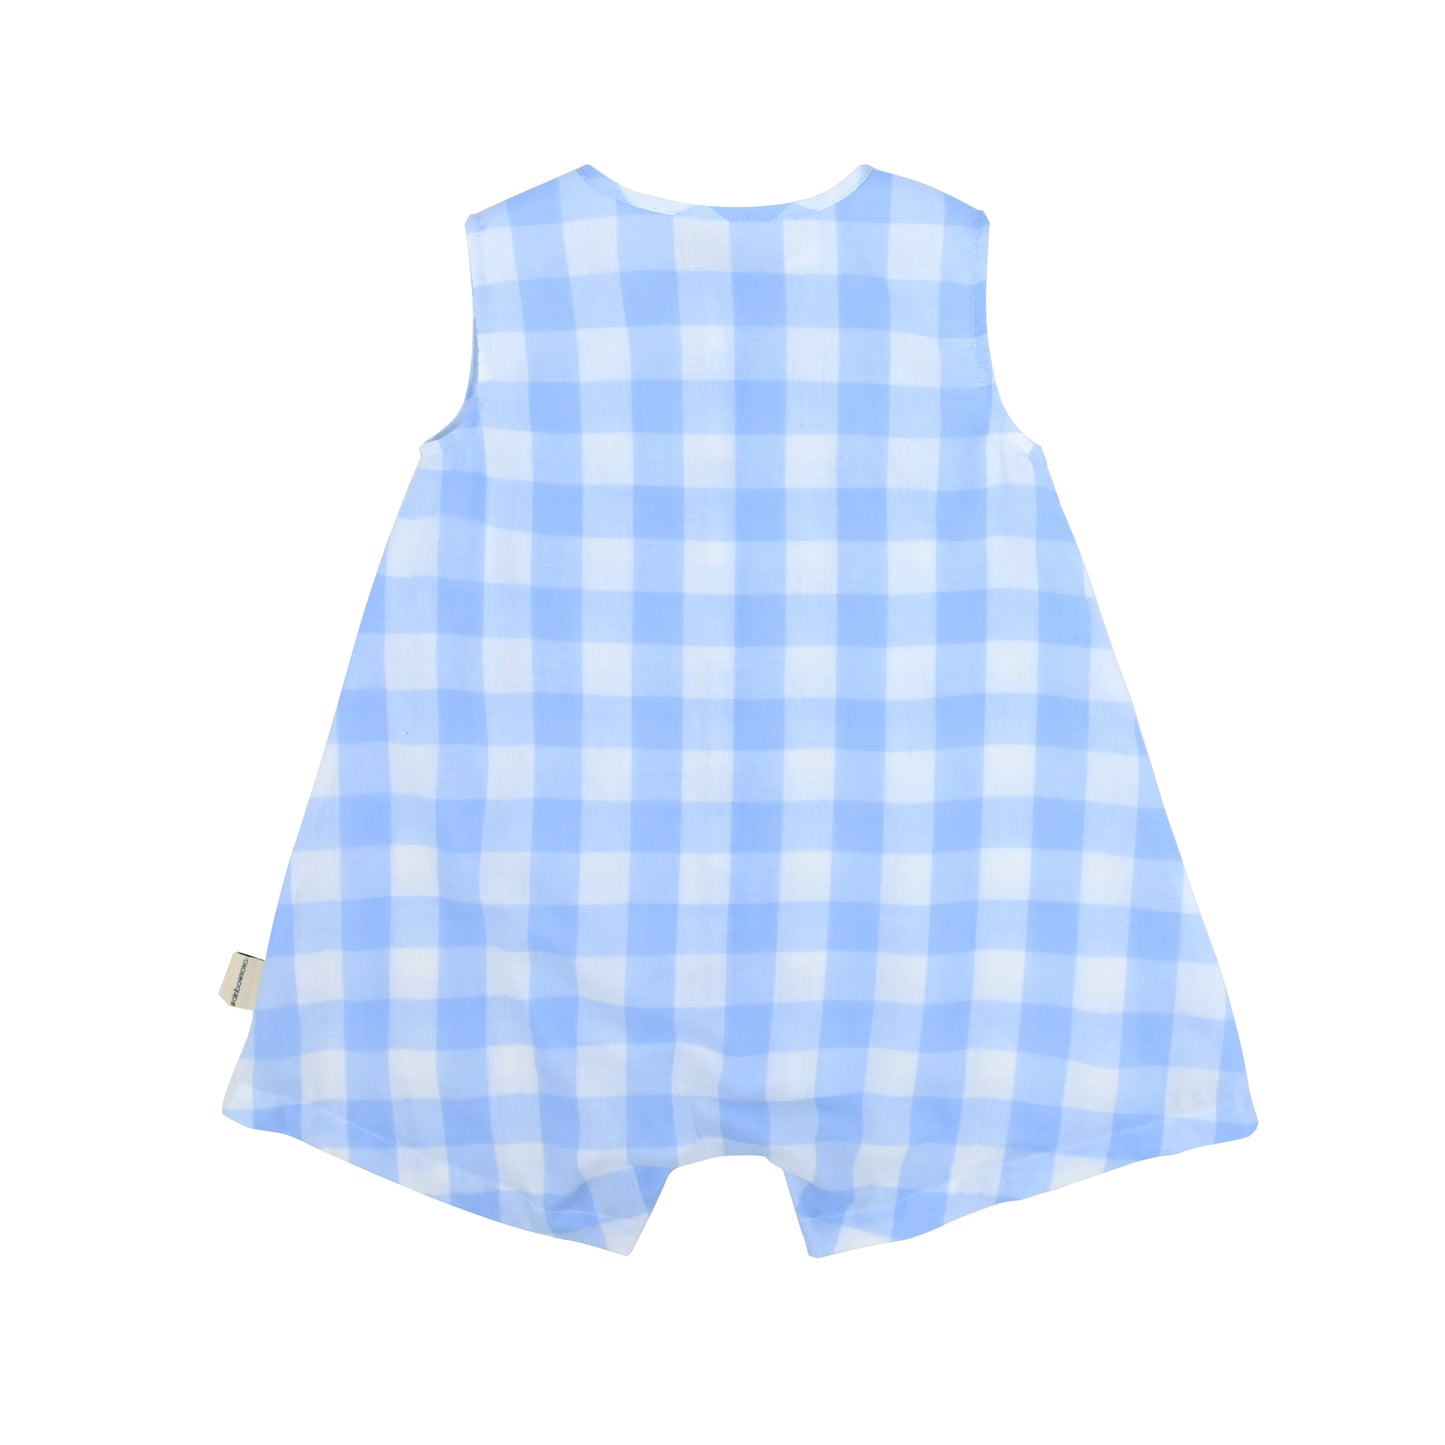 BABY BLUE CHECK PRINT SLEEVE-LESS PLAYSUIT